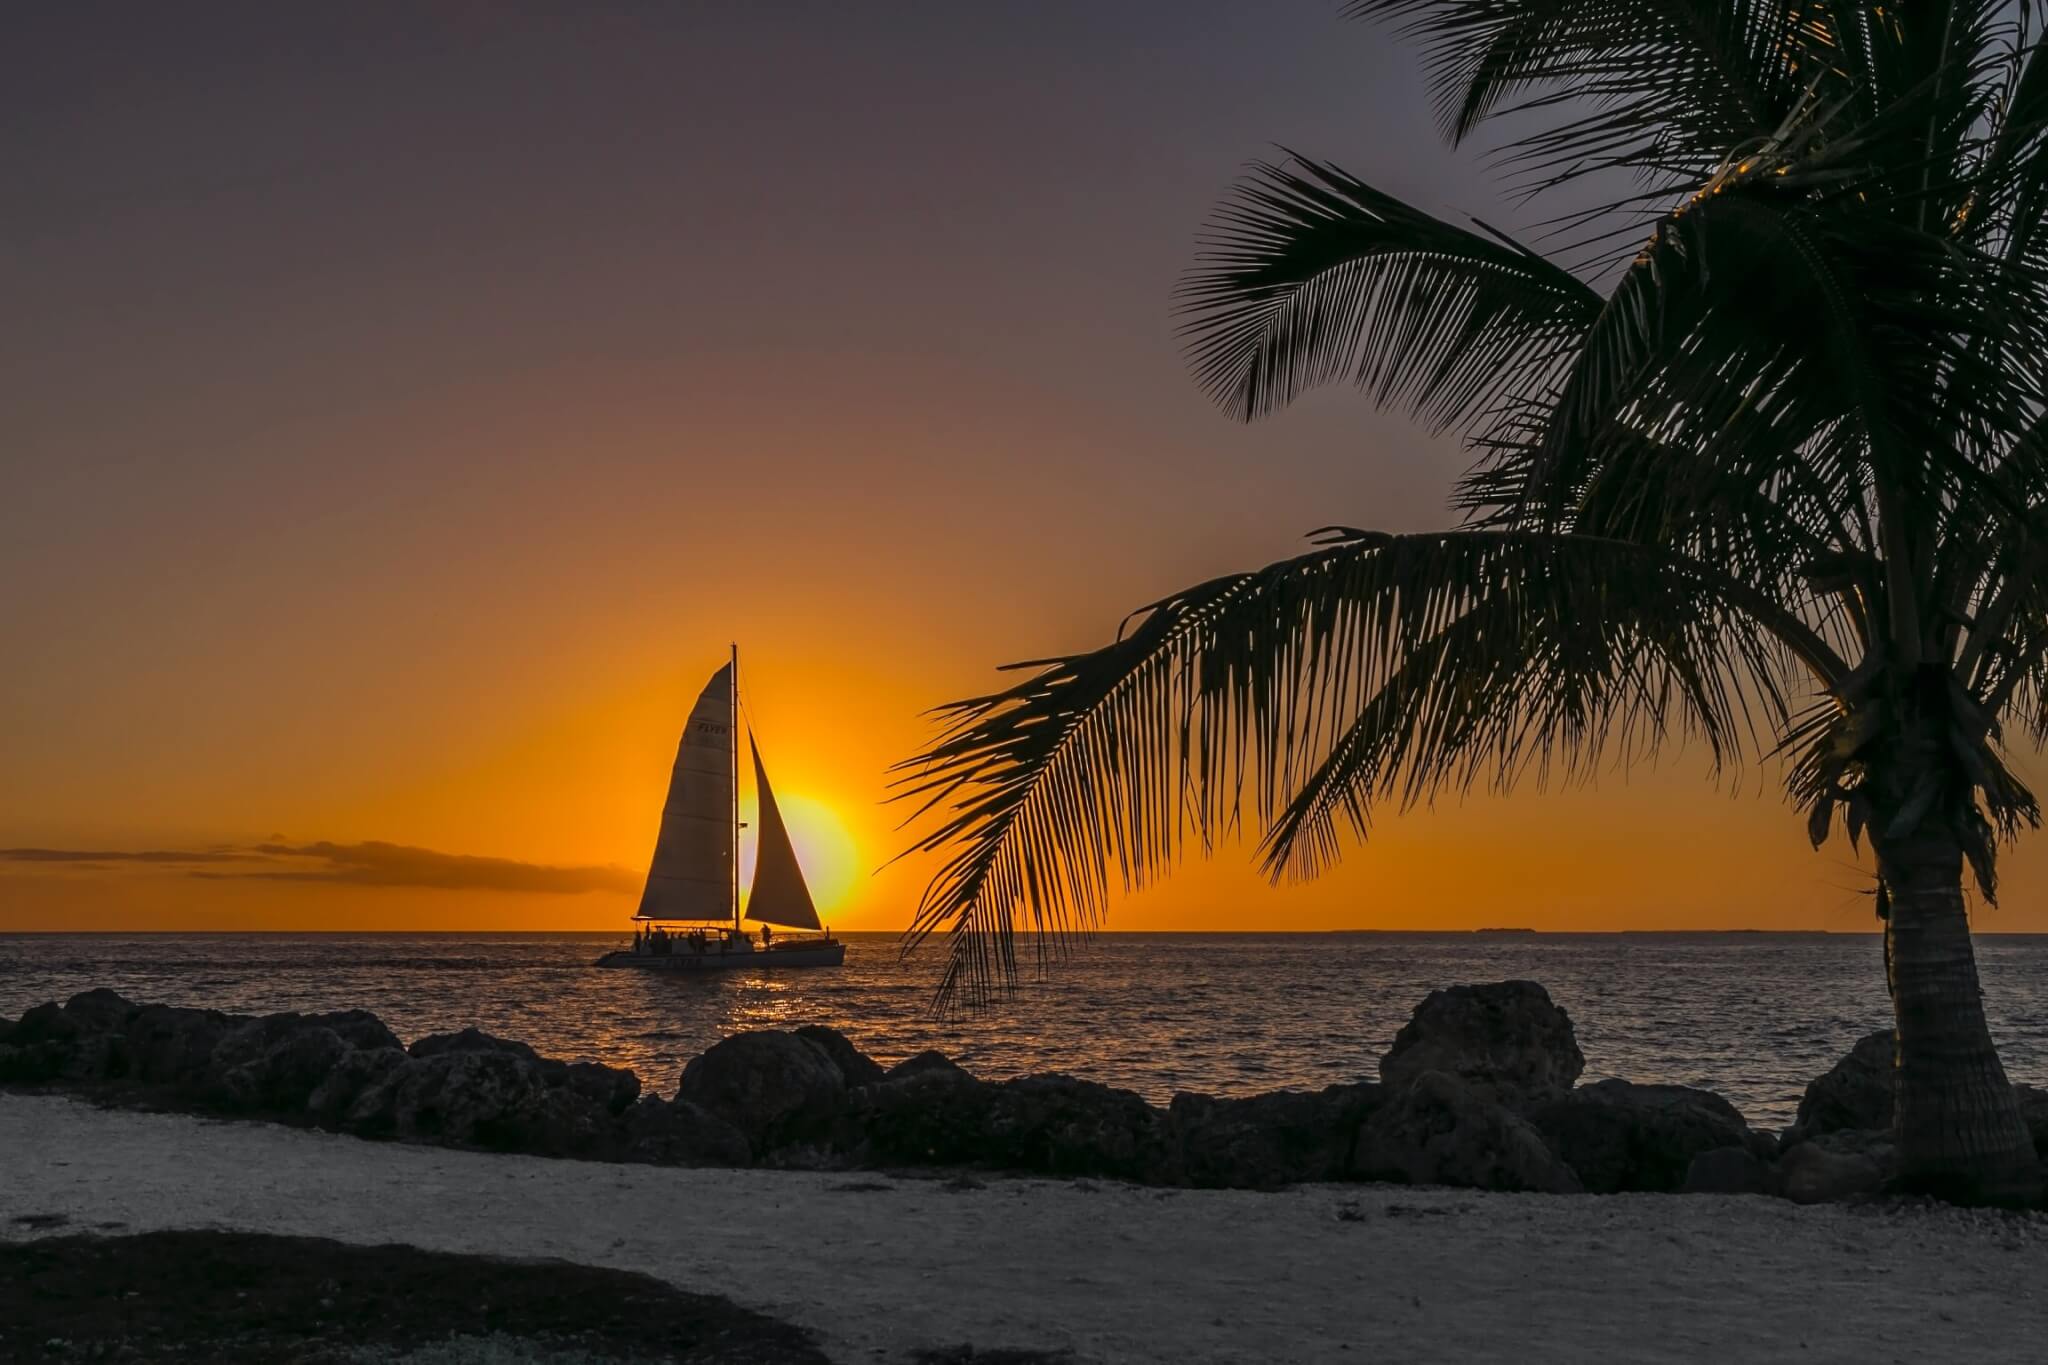 Sunset in Key West, Florida.